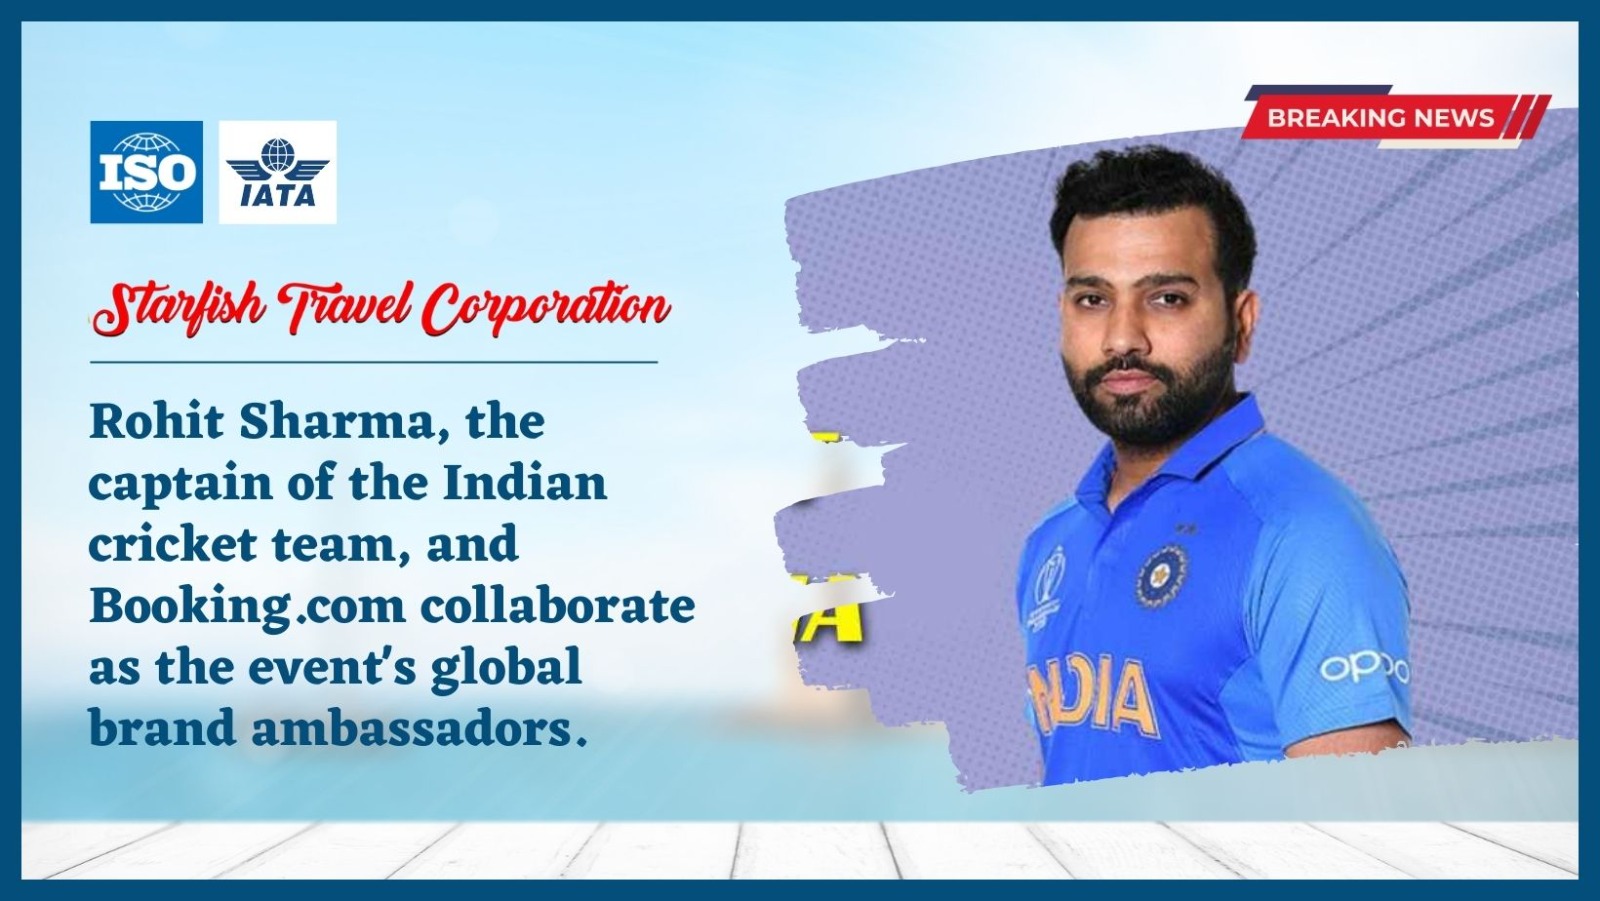 You are currently viewing Rohit Sharma, the captain of the Indian cricket team, and Booking.com collaborate as the event’s global brand ambassadors.